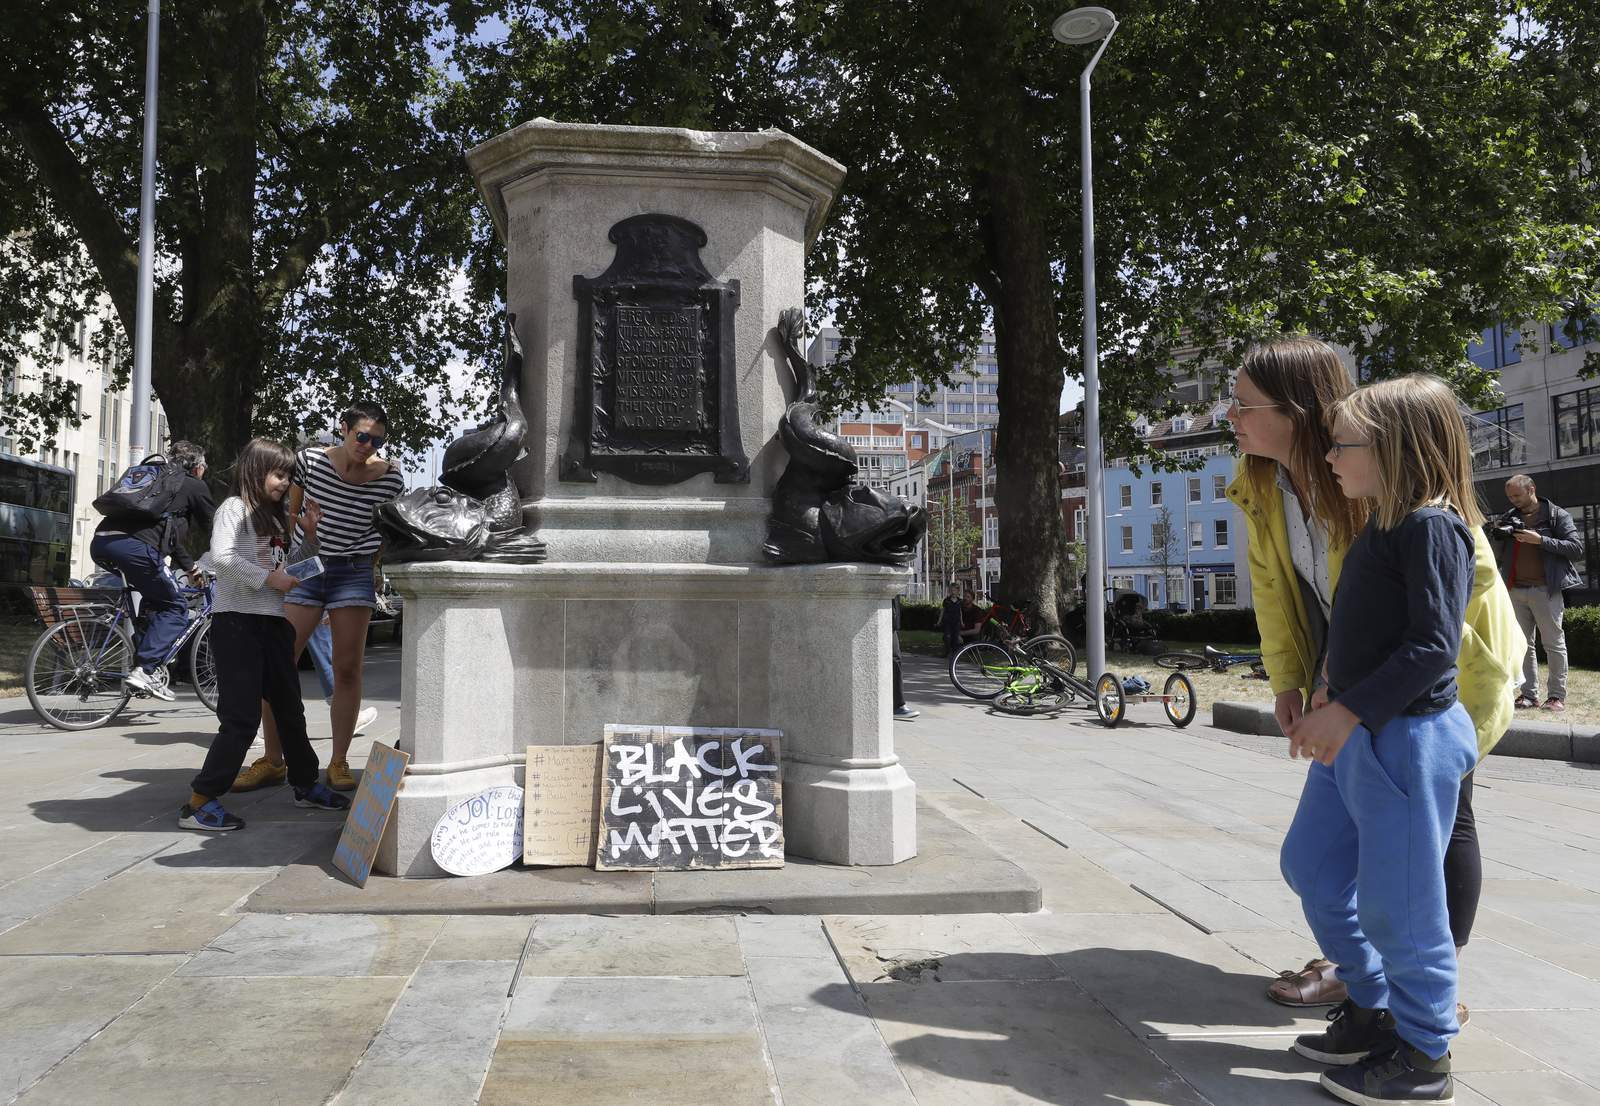 In Bristol, toppling of slave trader's statue a major moment